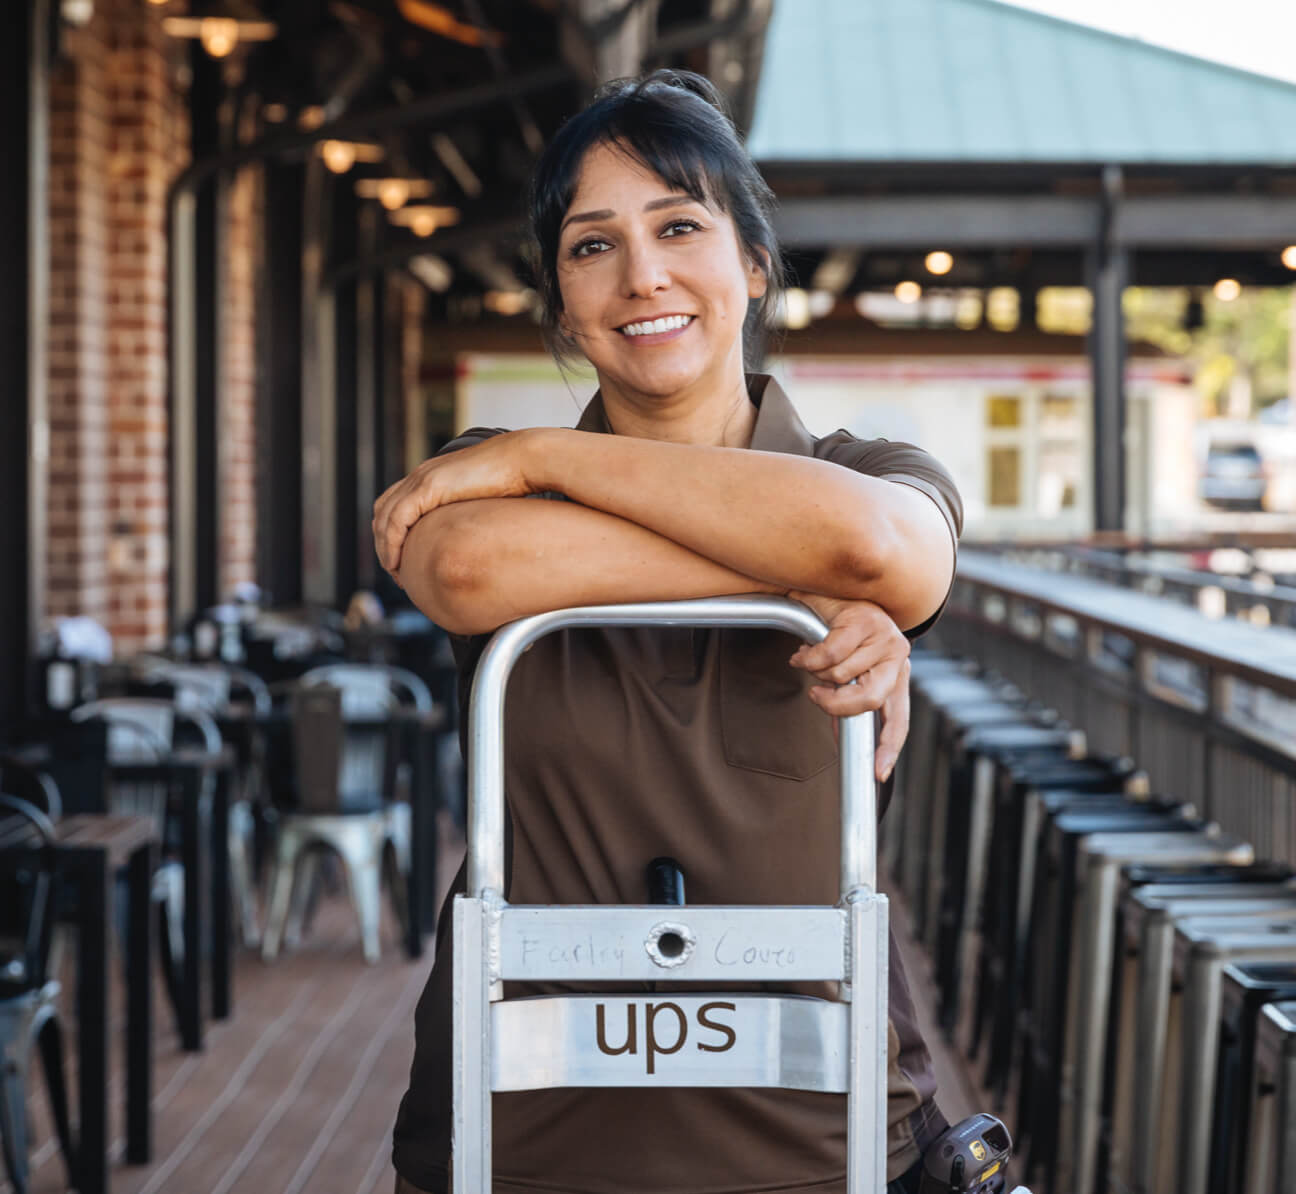 UPS worker smiling